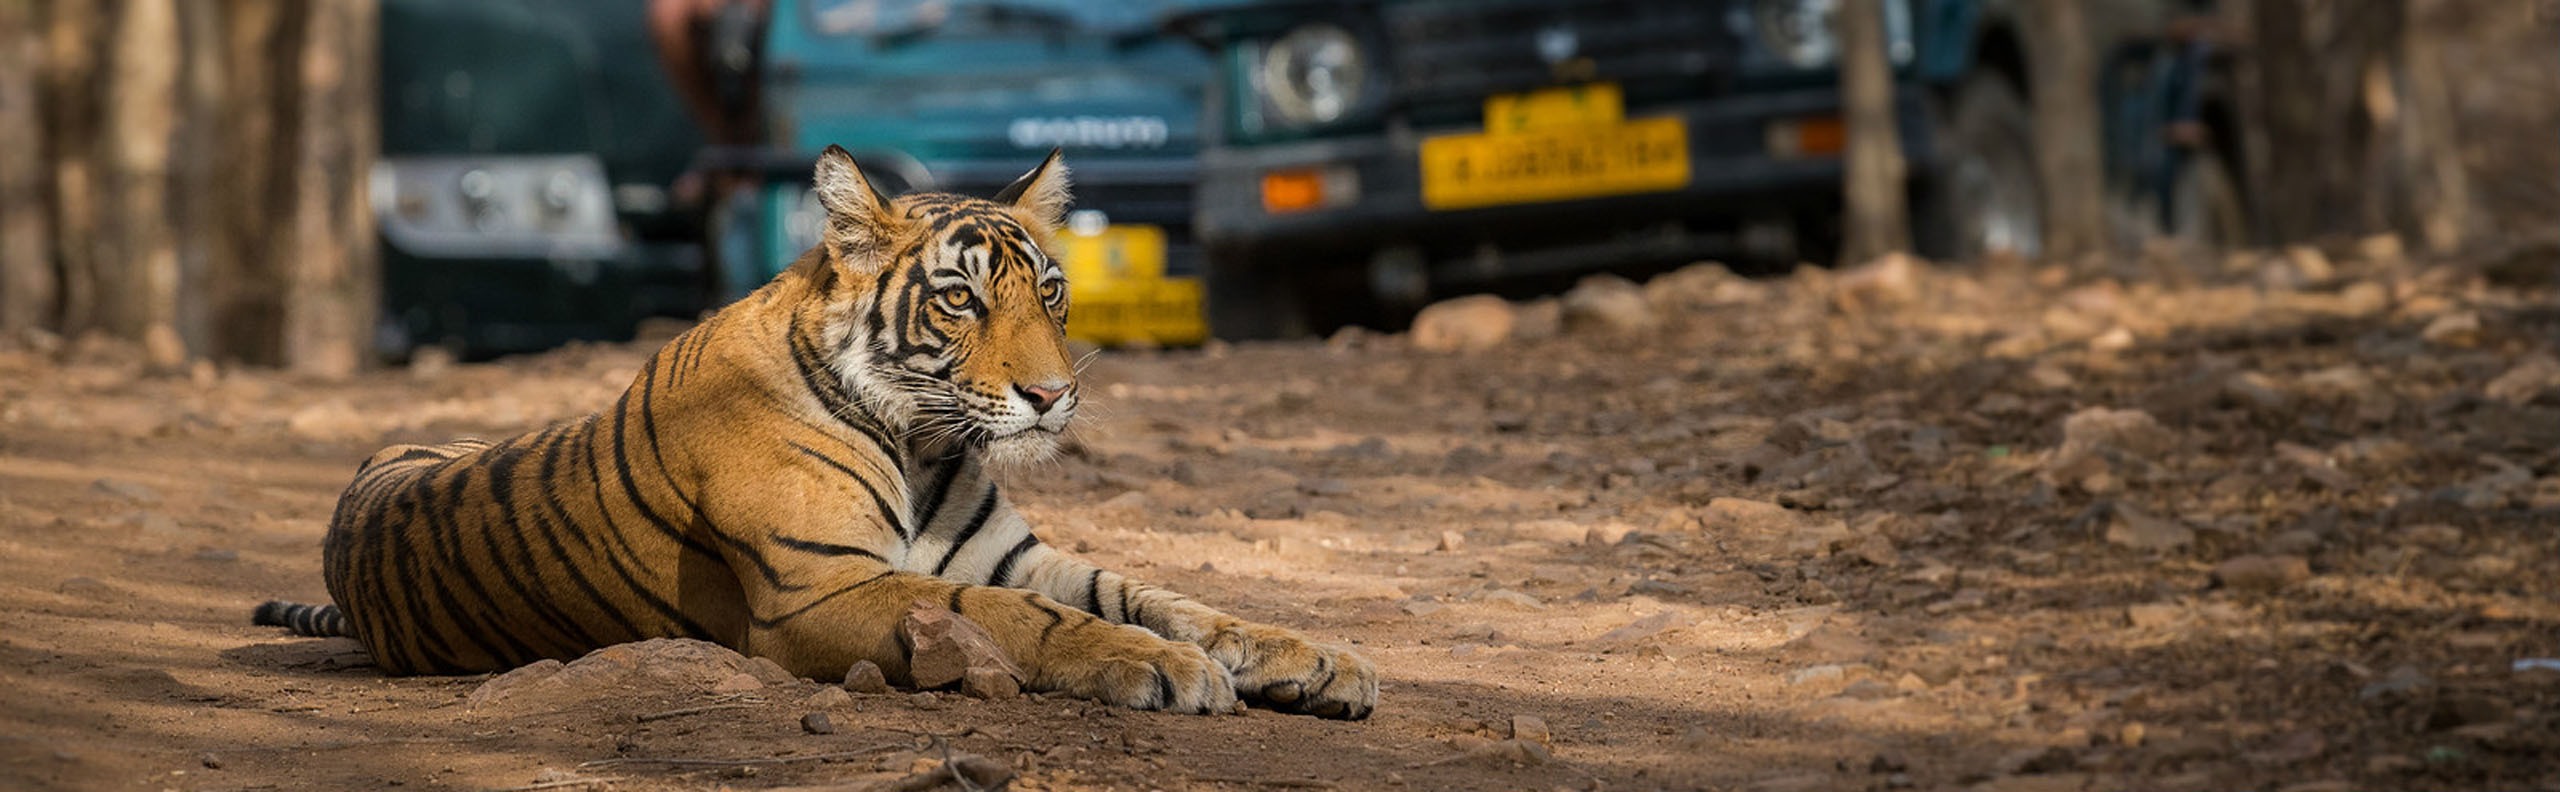 Best 7 National Parks for Tiger Safaris in India 2023 (Tips & Location Map)